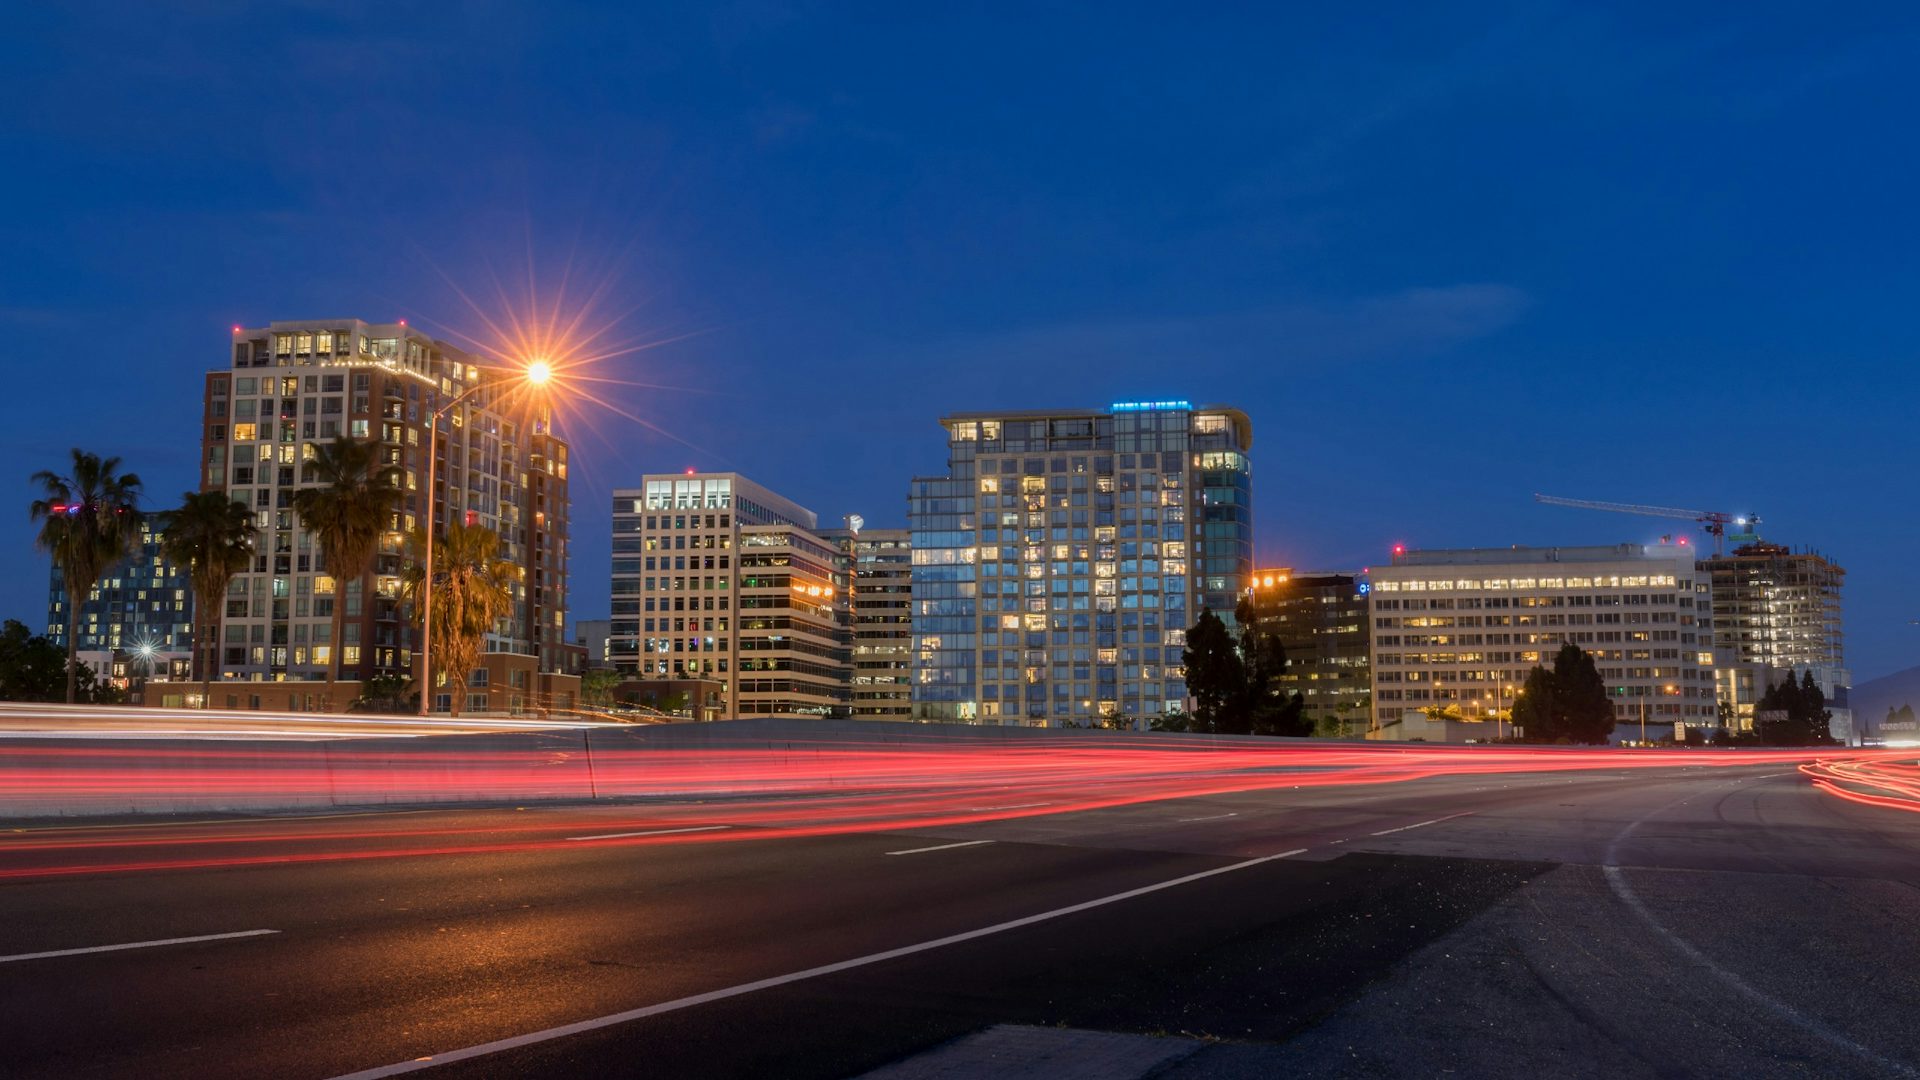 San Jose, California city scape at night with blurred traffic